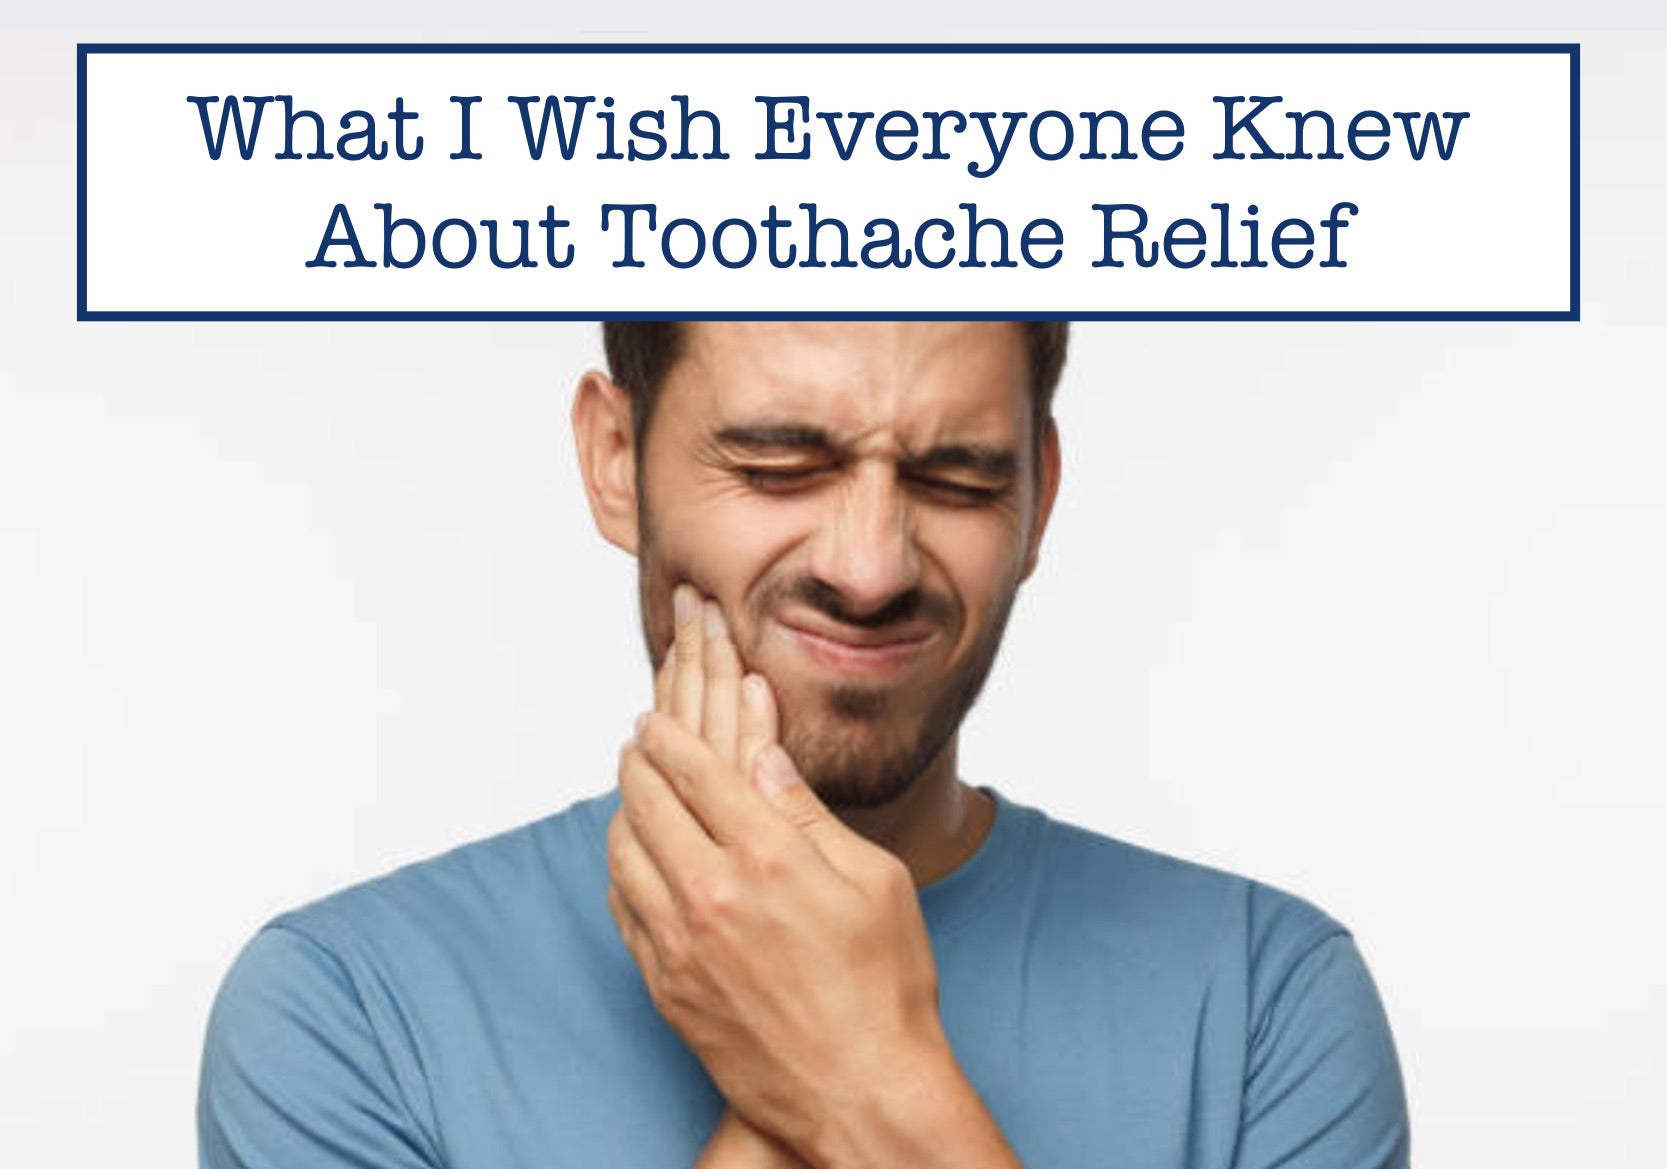 What I Wish Everyone Knew About Toothache Relief